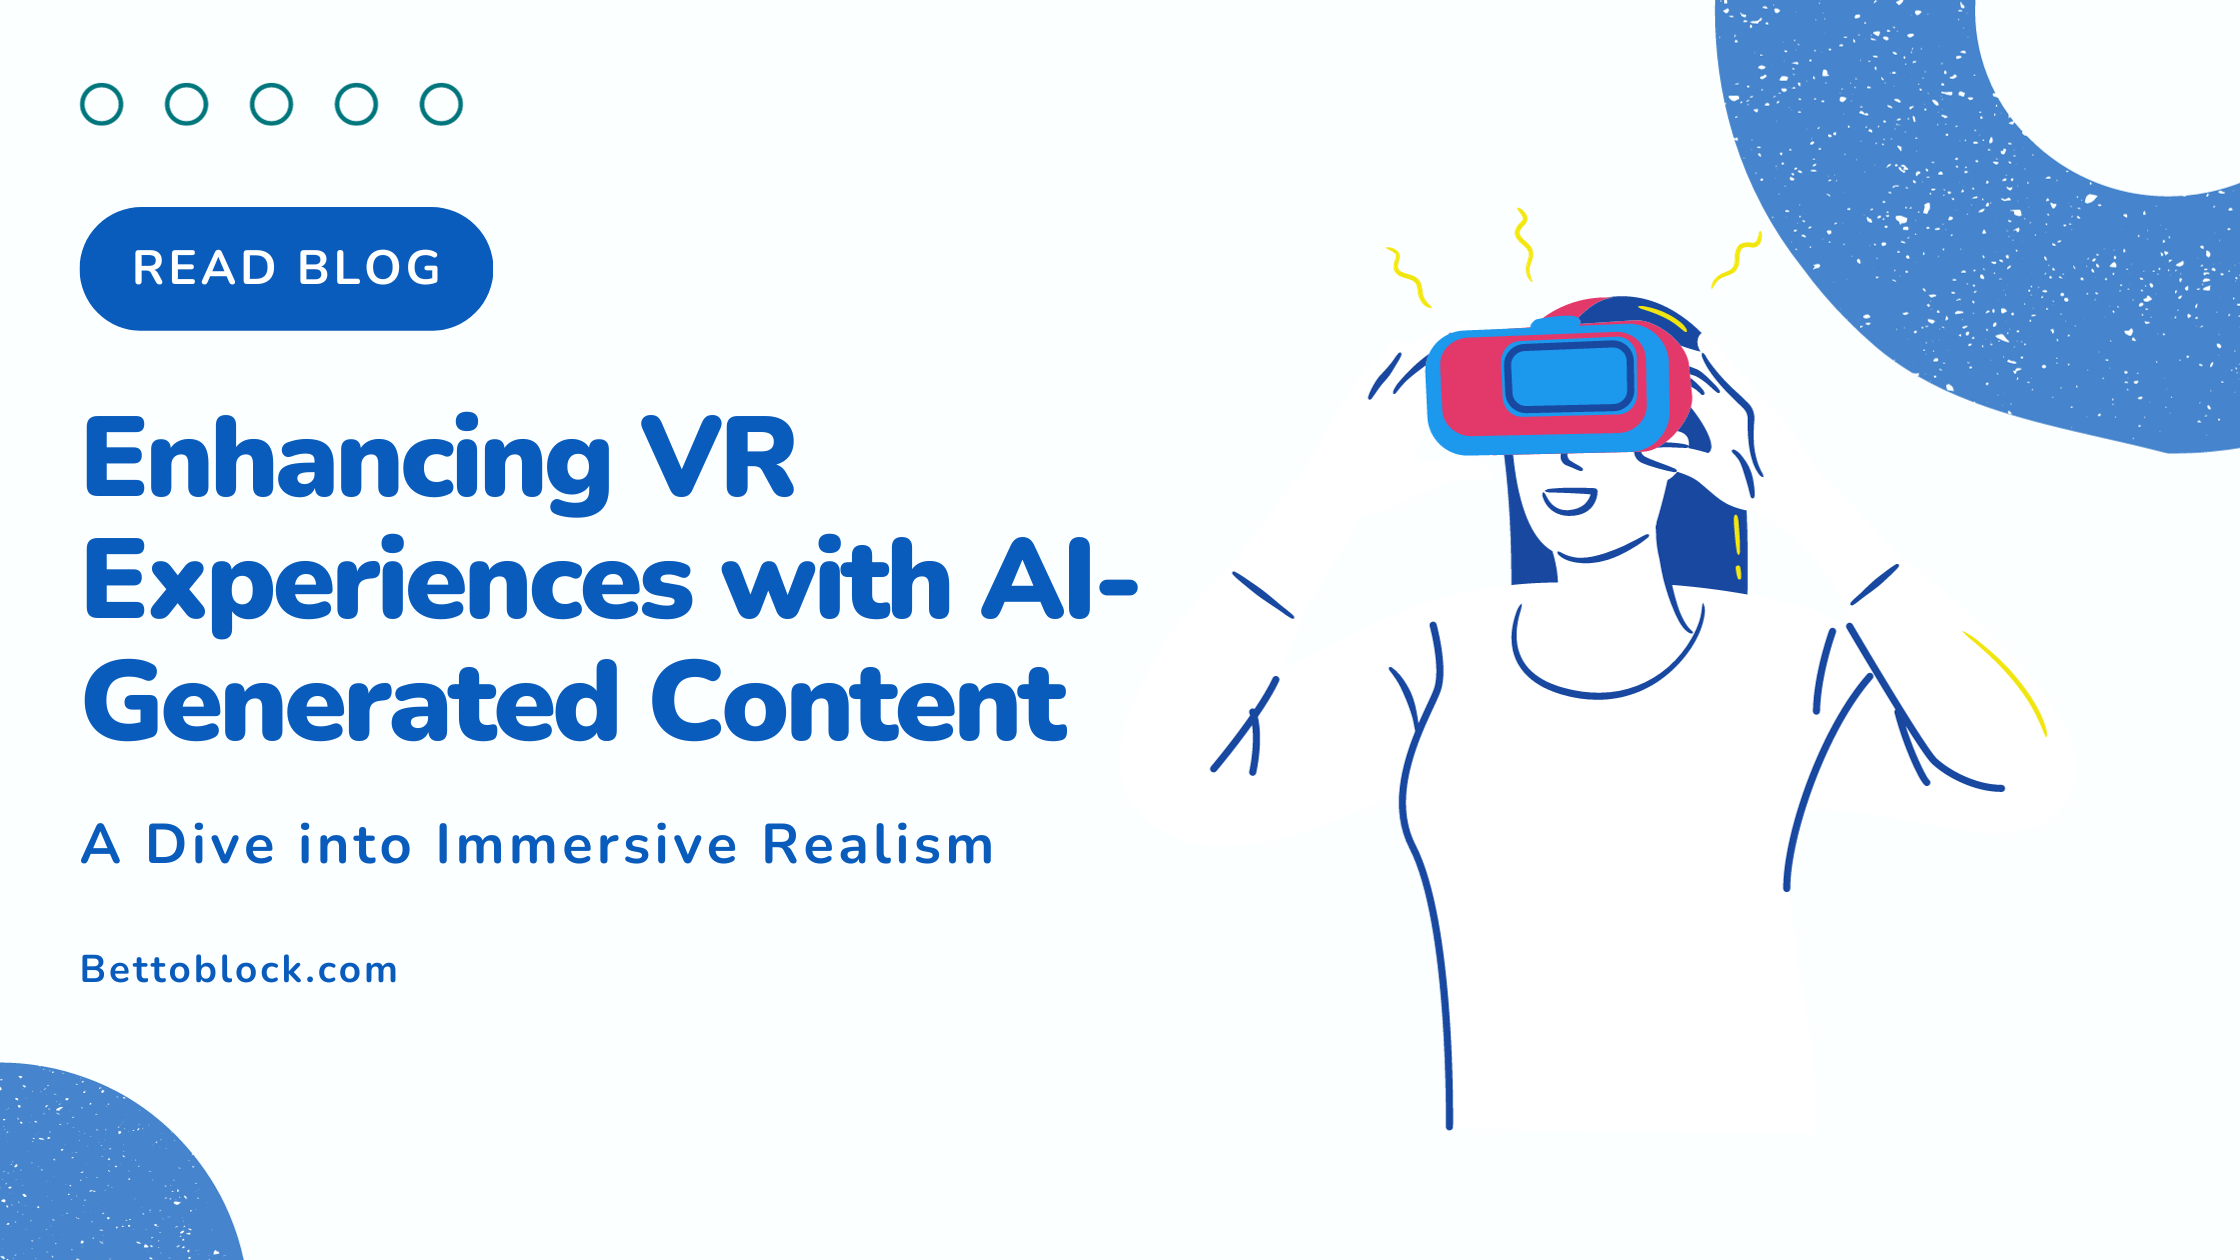 AI-Generated Content for VR: Creating More Immersive and Realistic Experiences